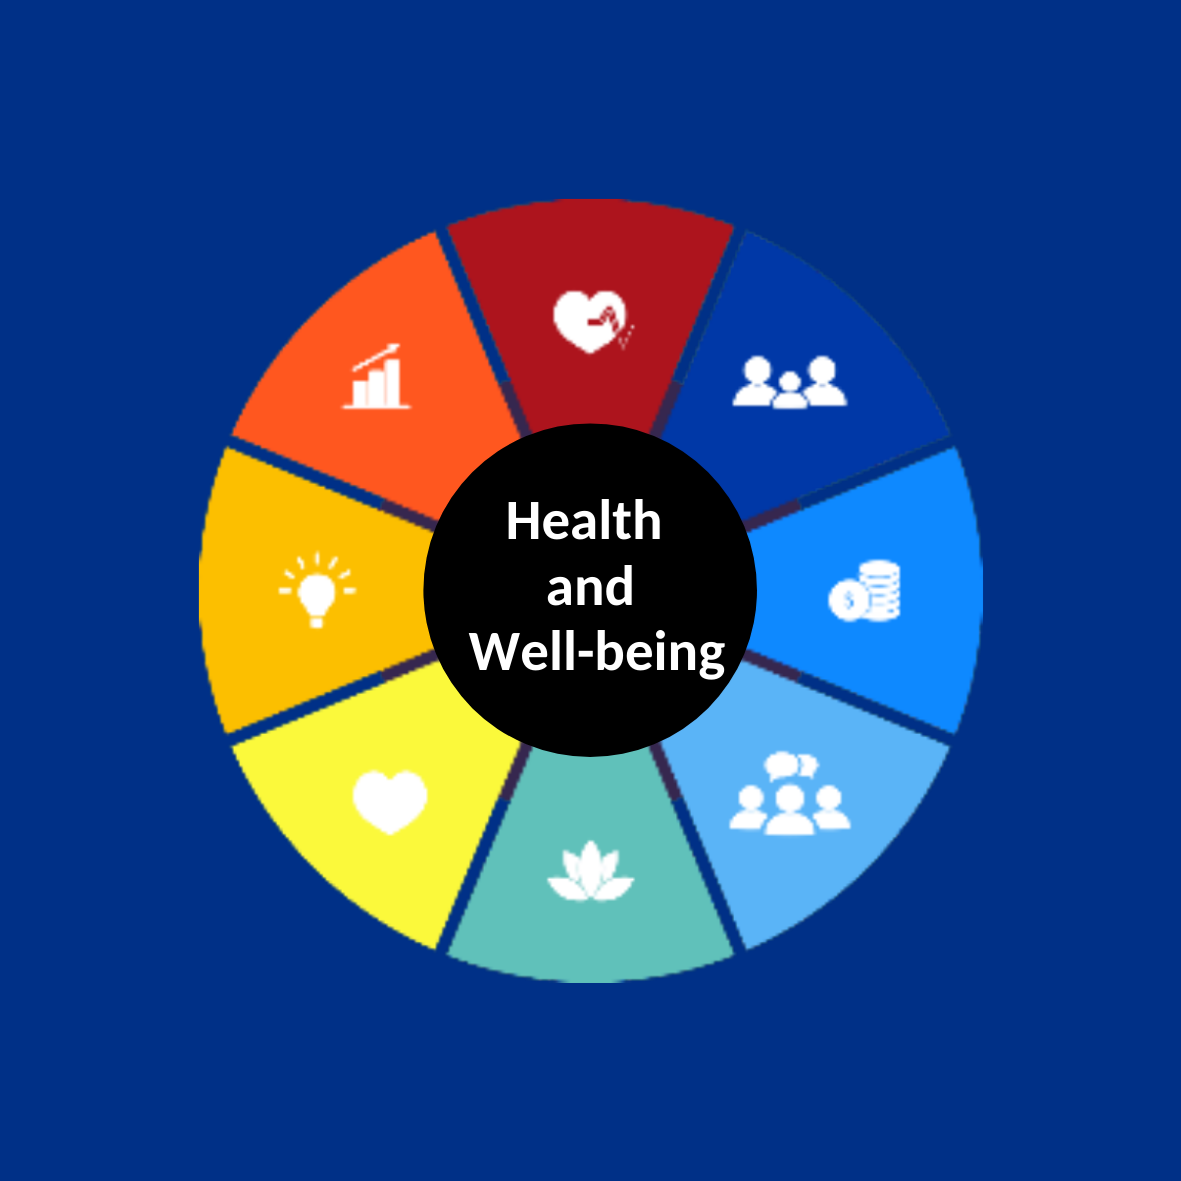 Circle in Segments With Icons and Words 'Health and Wellbeing'